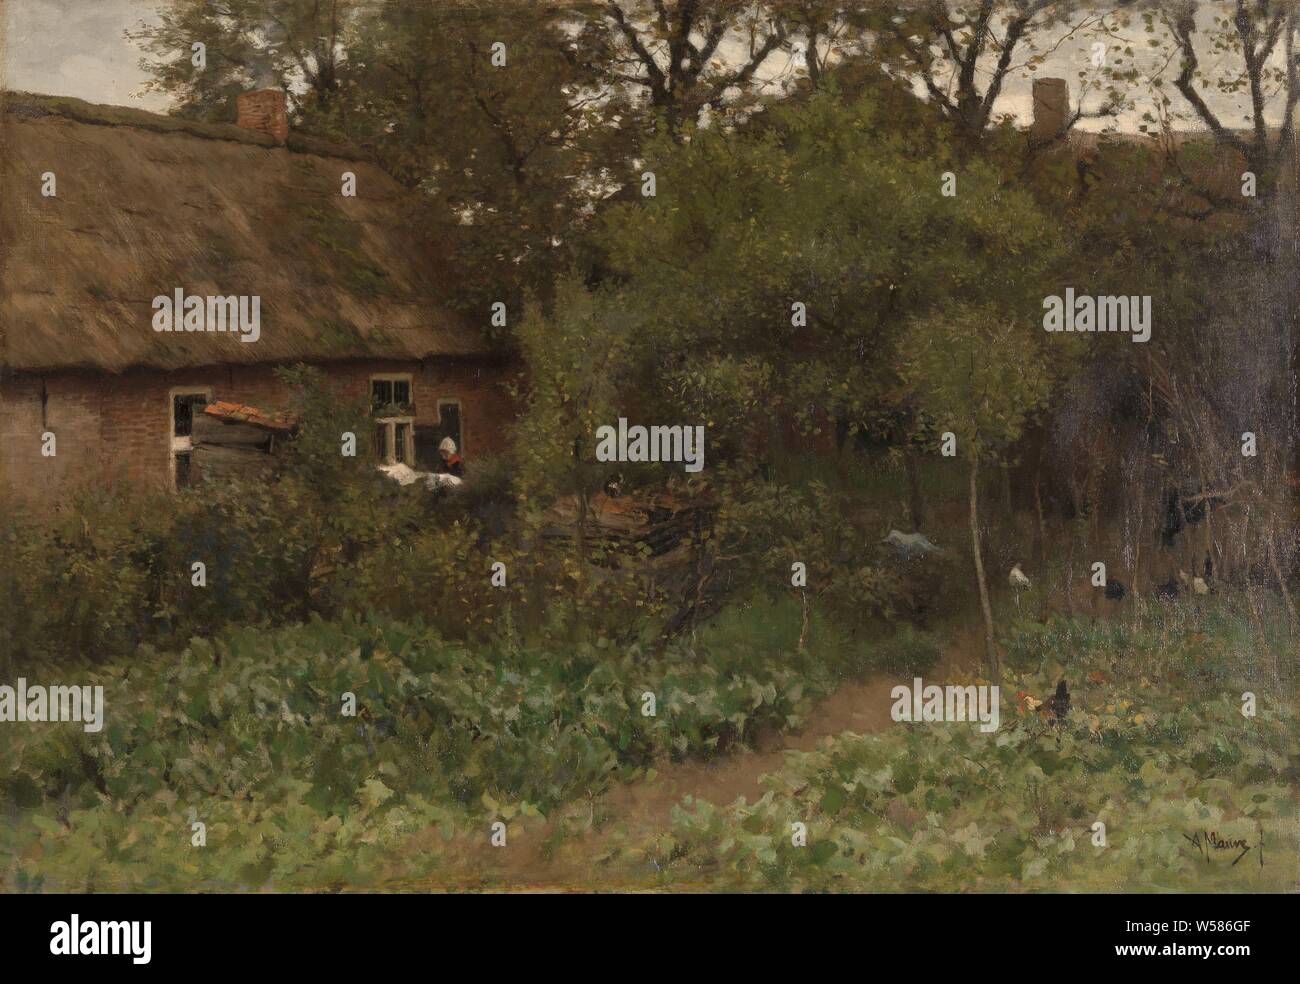 The Vegetable Garden, The vegetable garden, A vegetable garden next to a farmhouse with a thatched roof. At the house a woman is busy with laundry. On the right in the garden a few chickens, garden, Anton Mauve, c. 1885 - c. 1888, canvas, oil paint (paint), h 61 cm × w 87 cm h 91 cm × w 116 cm × d 12.5 cm Stock Photo